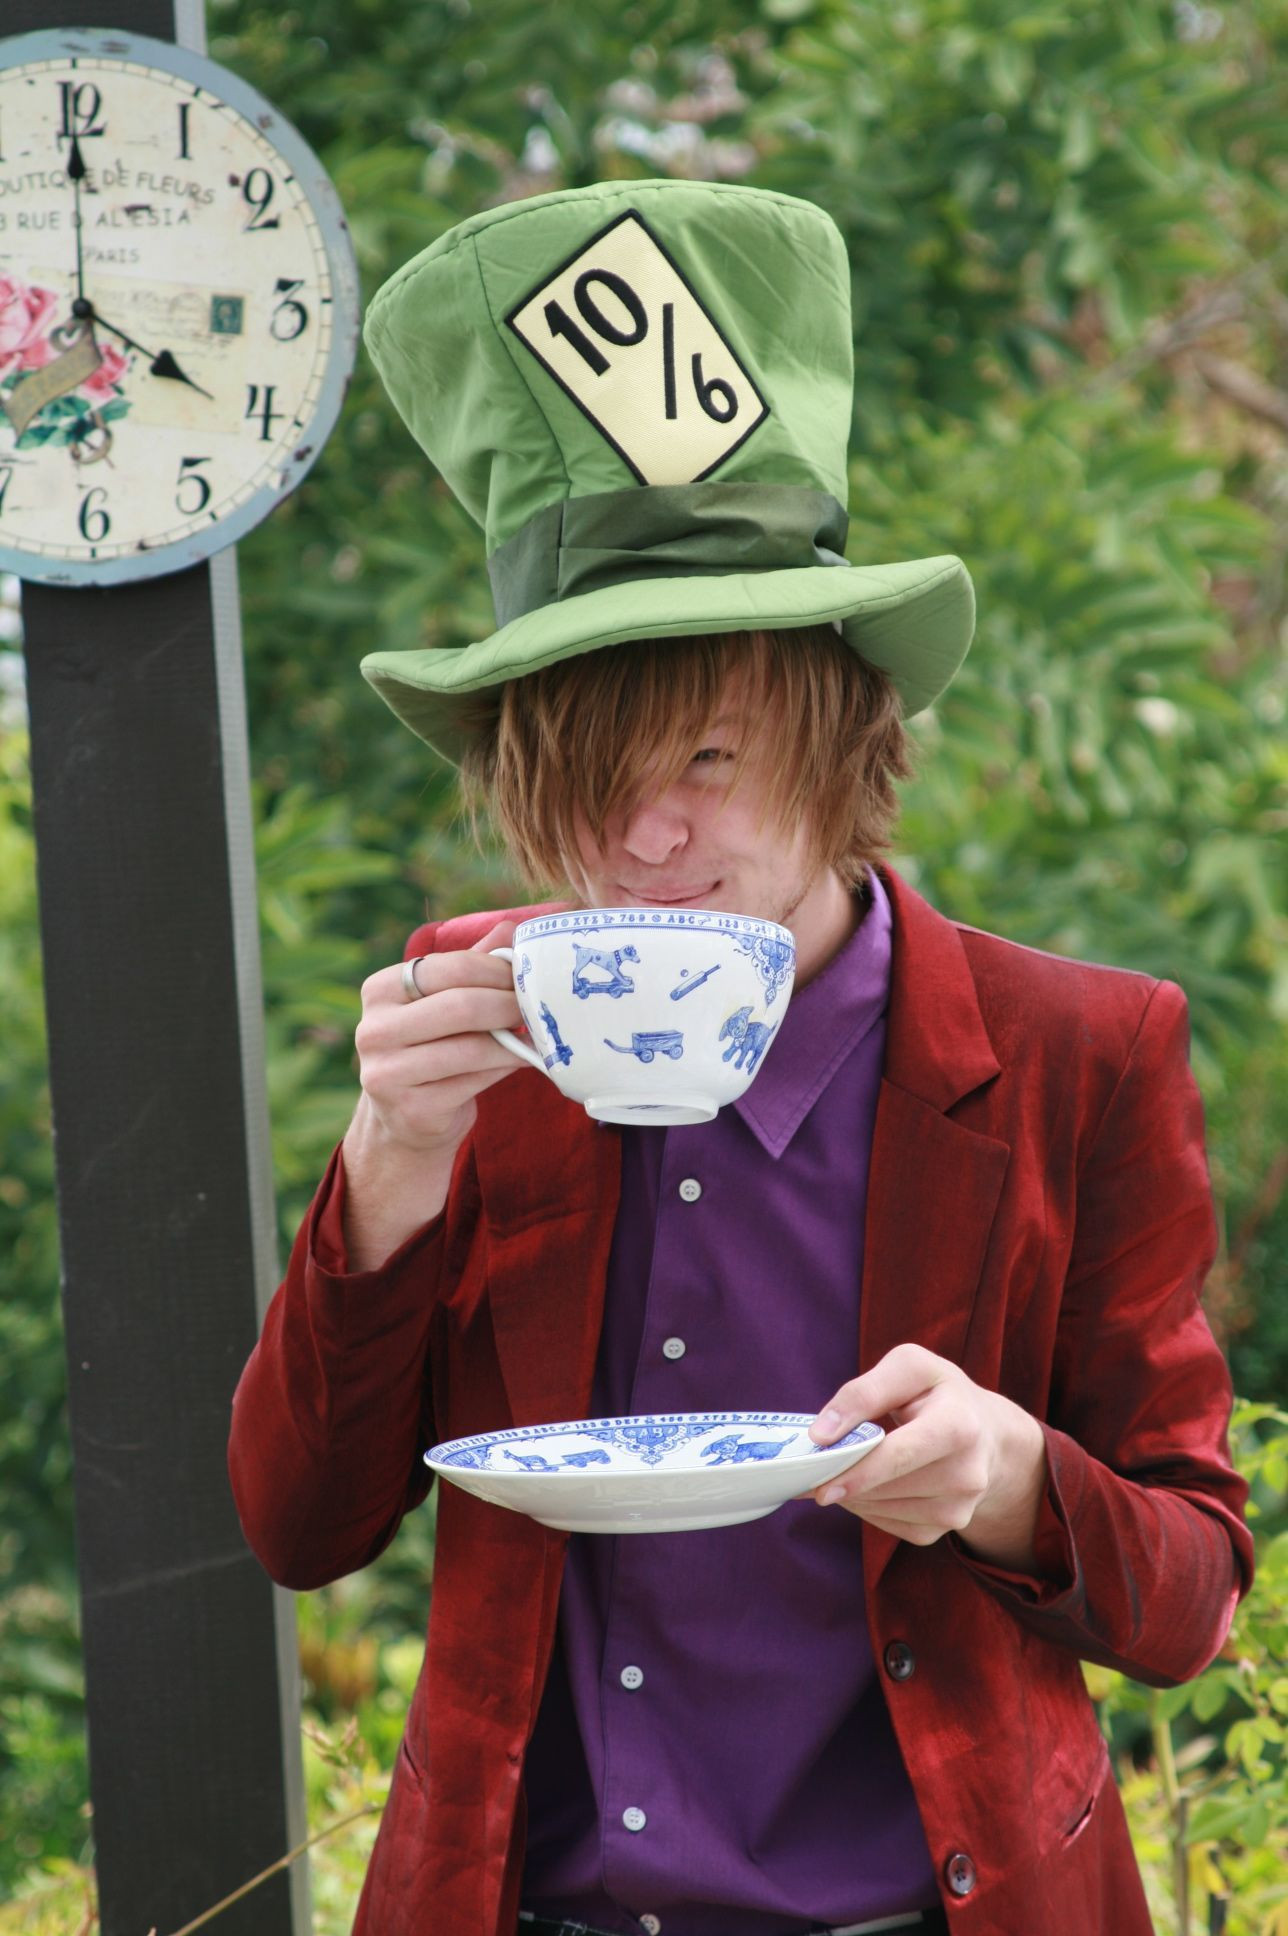 Mad Hatter Tea Party Costume Ideas
 MaD HaTTeR Easter Tea Party